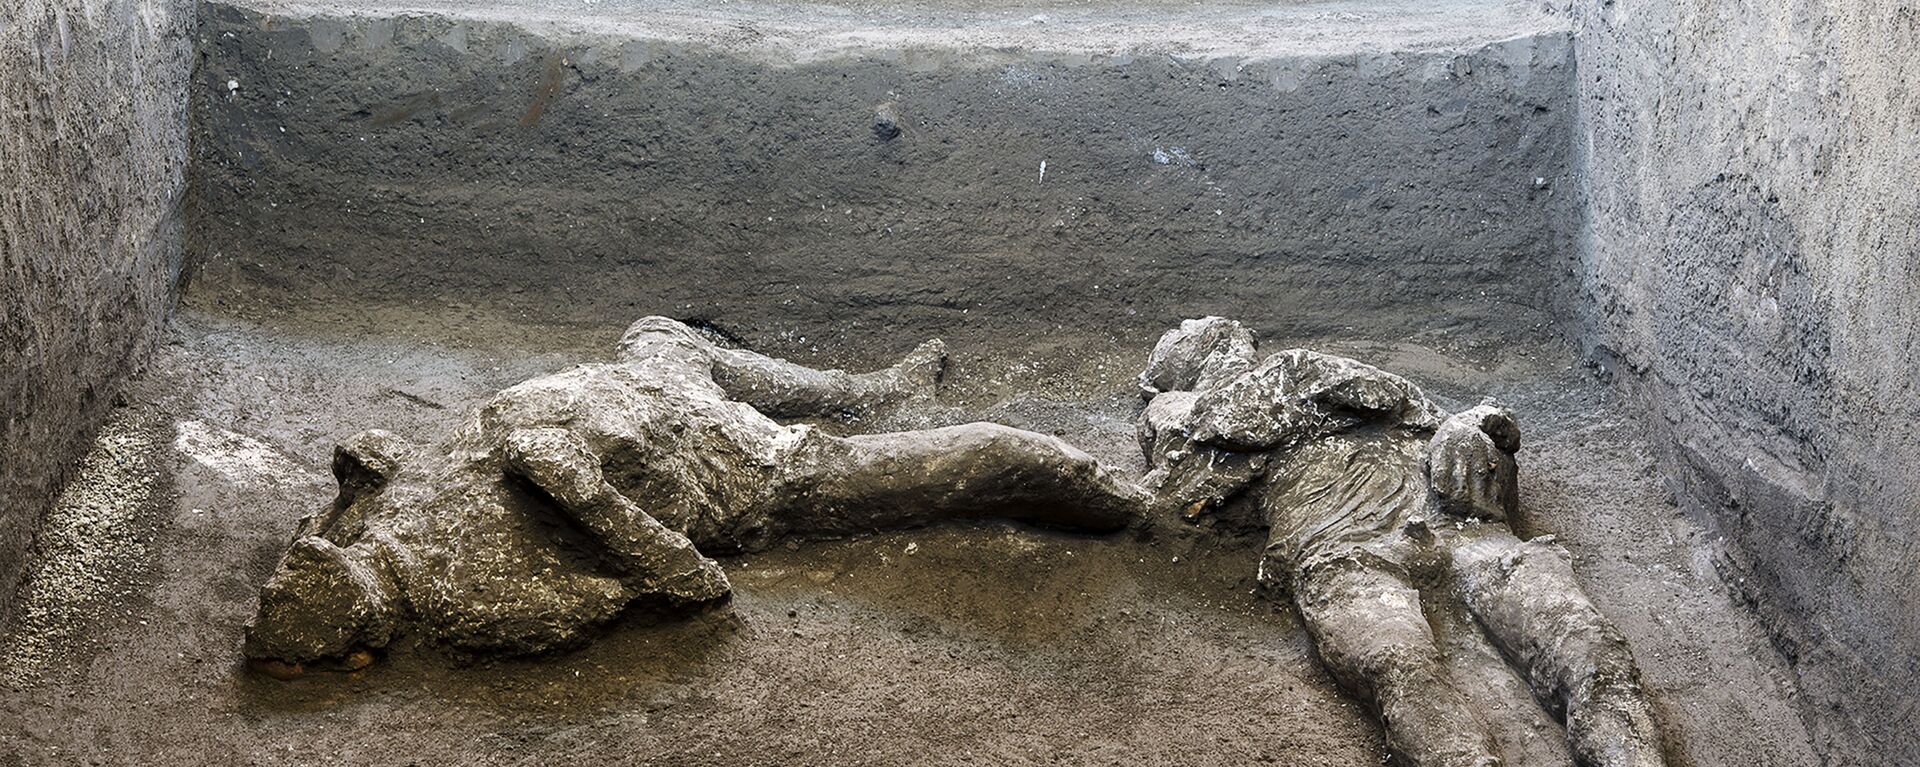 The casts of what are believed to have been a rich man and his male slave fleeing the volcanic eruption of Vesuvius nearly 2,000 years ago, are seen in what was an elegant villa on the outskirts of the ancient Roman city of Pompeii destroyed by the eruption in 79 A.D., where they were discovered during recents excavations, Pompeii archaeological park officials said Saturday, Nov. 21, 2020 - Sputnik International, 1920, 22.08.2023